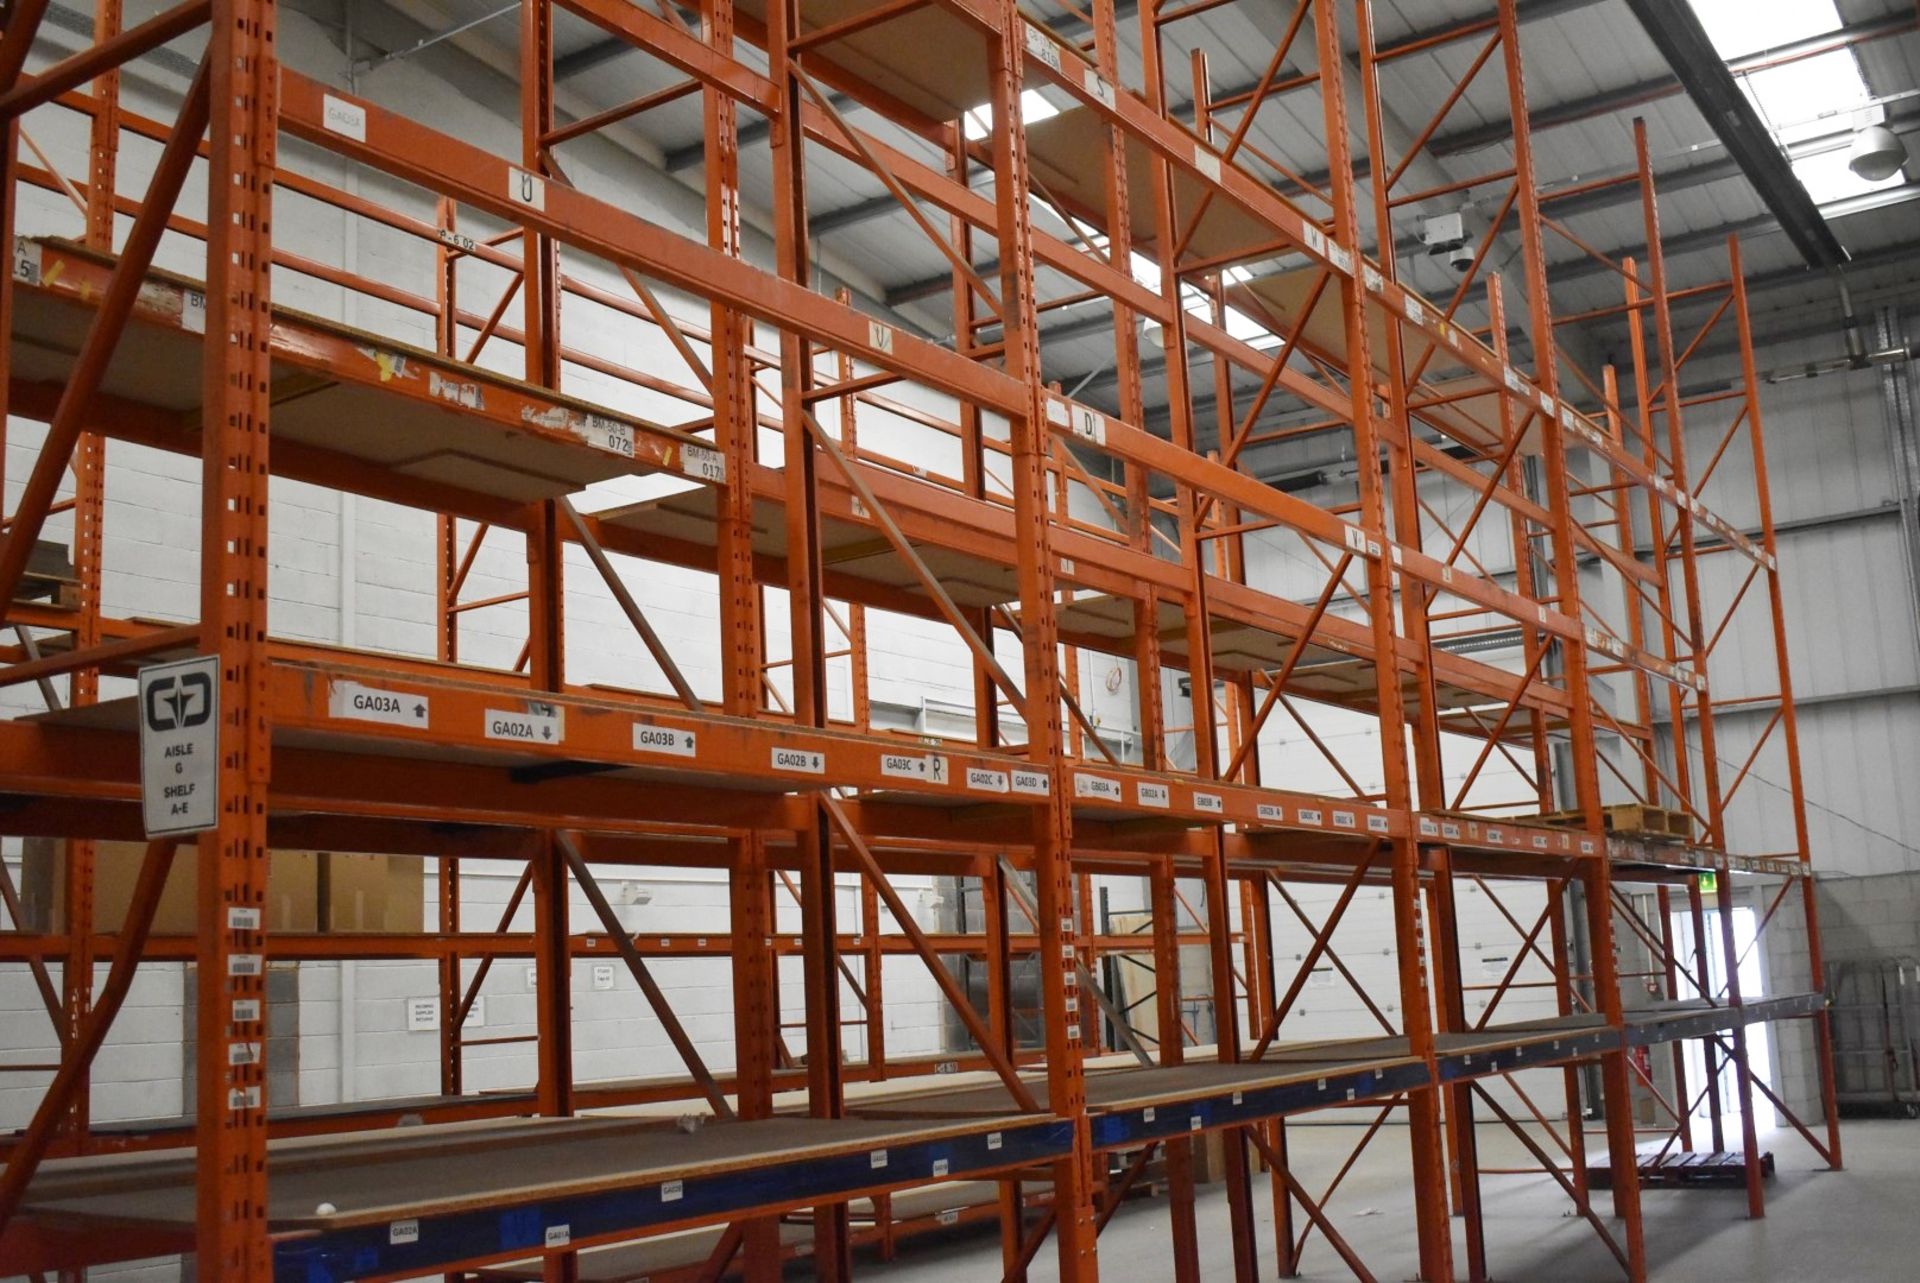 5 x Bays of RediRack Warehouse Pallet Racking - Lot Includes 6 x Uprights and 36 x Crossbeams - - Image 4 of 8